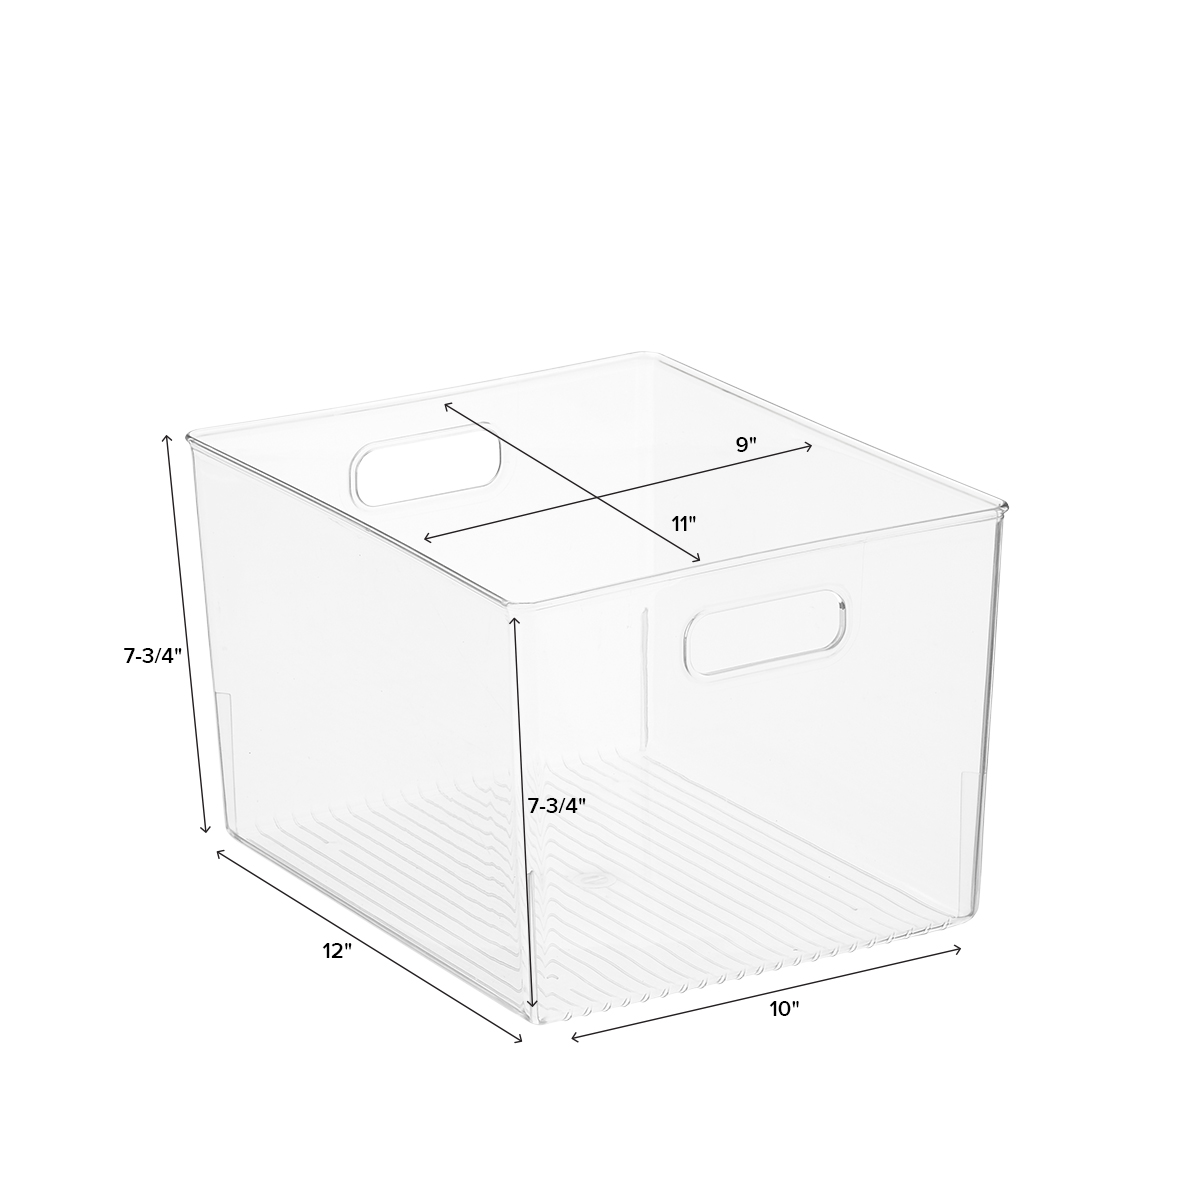 iDesign Linus Kitchen Bins | The Container Store